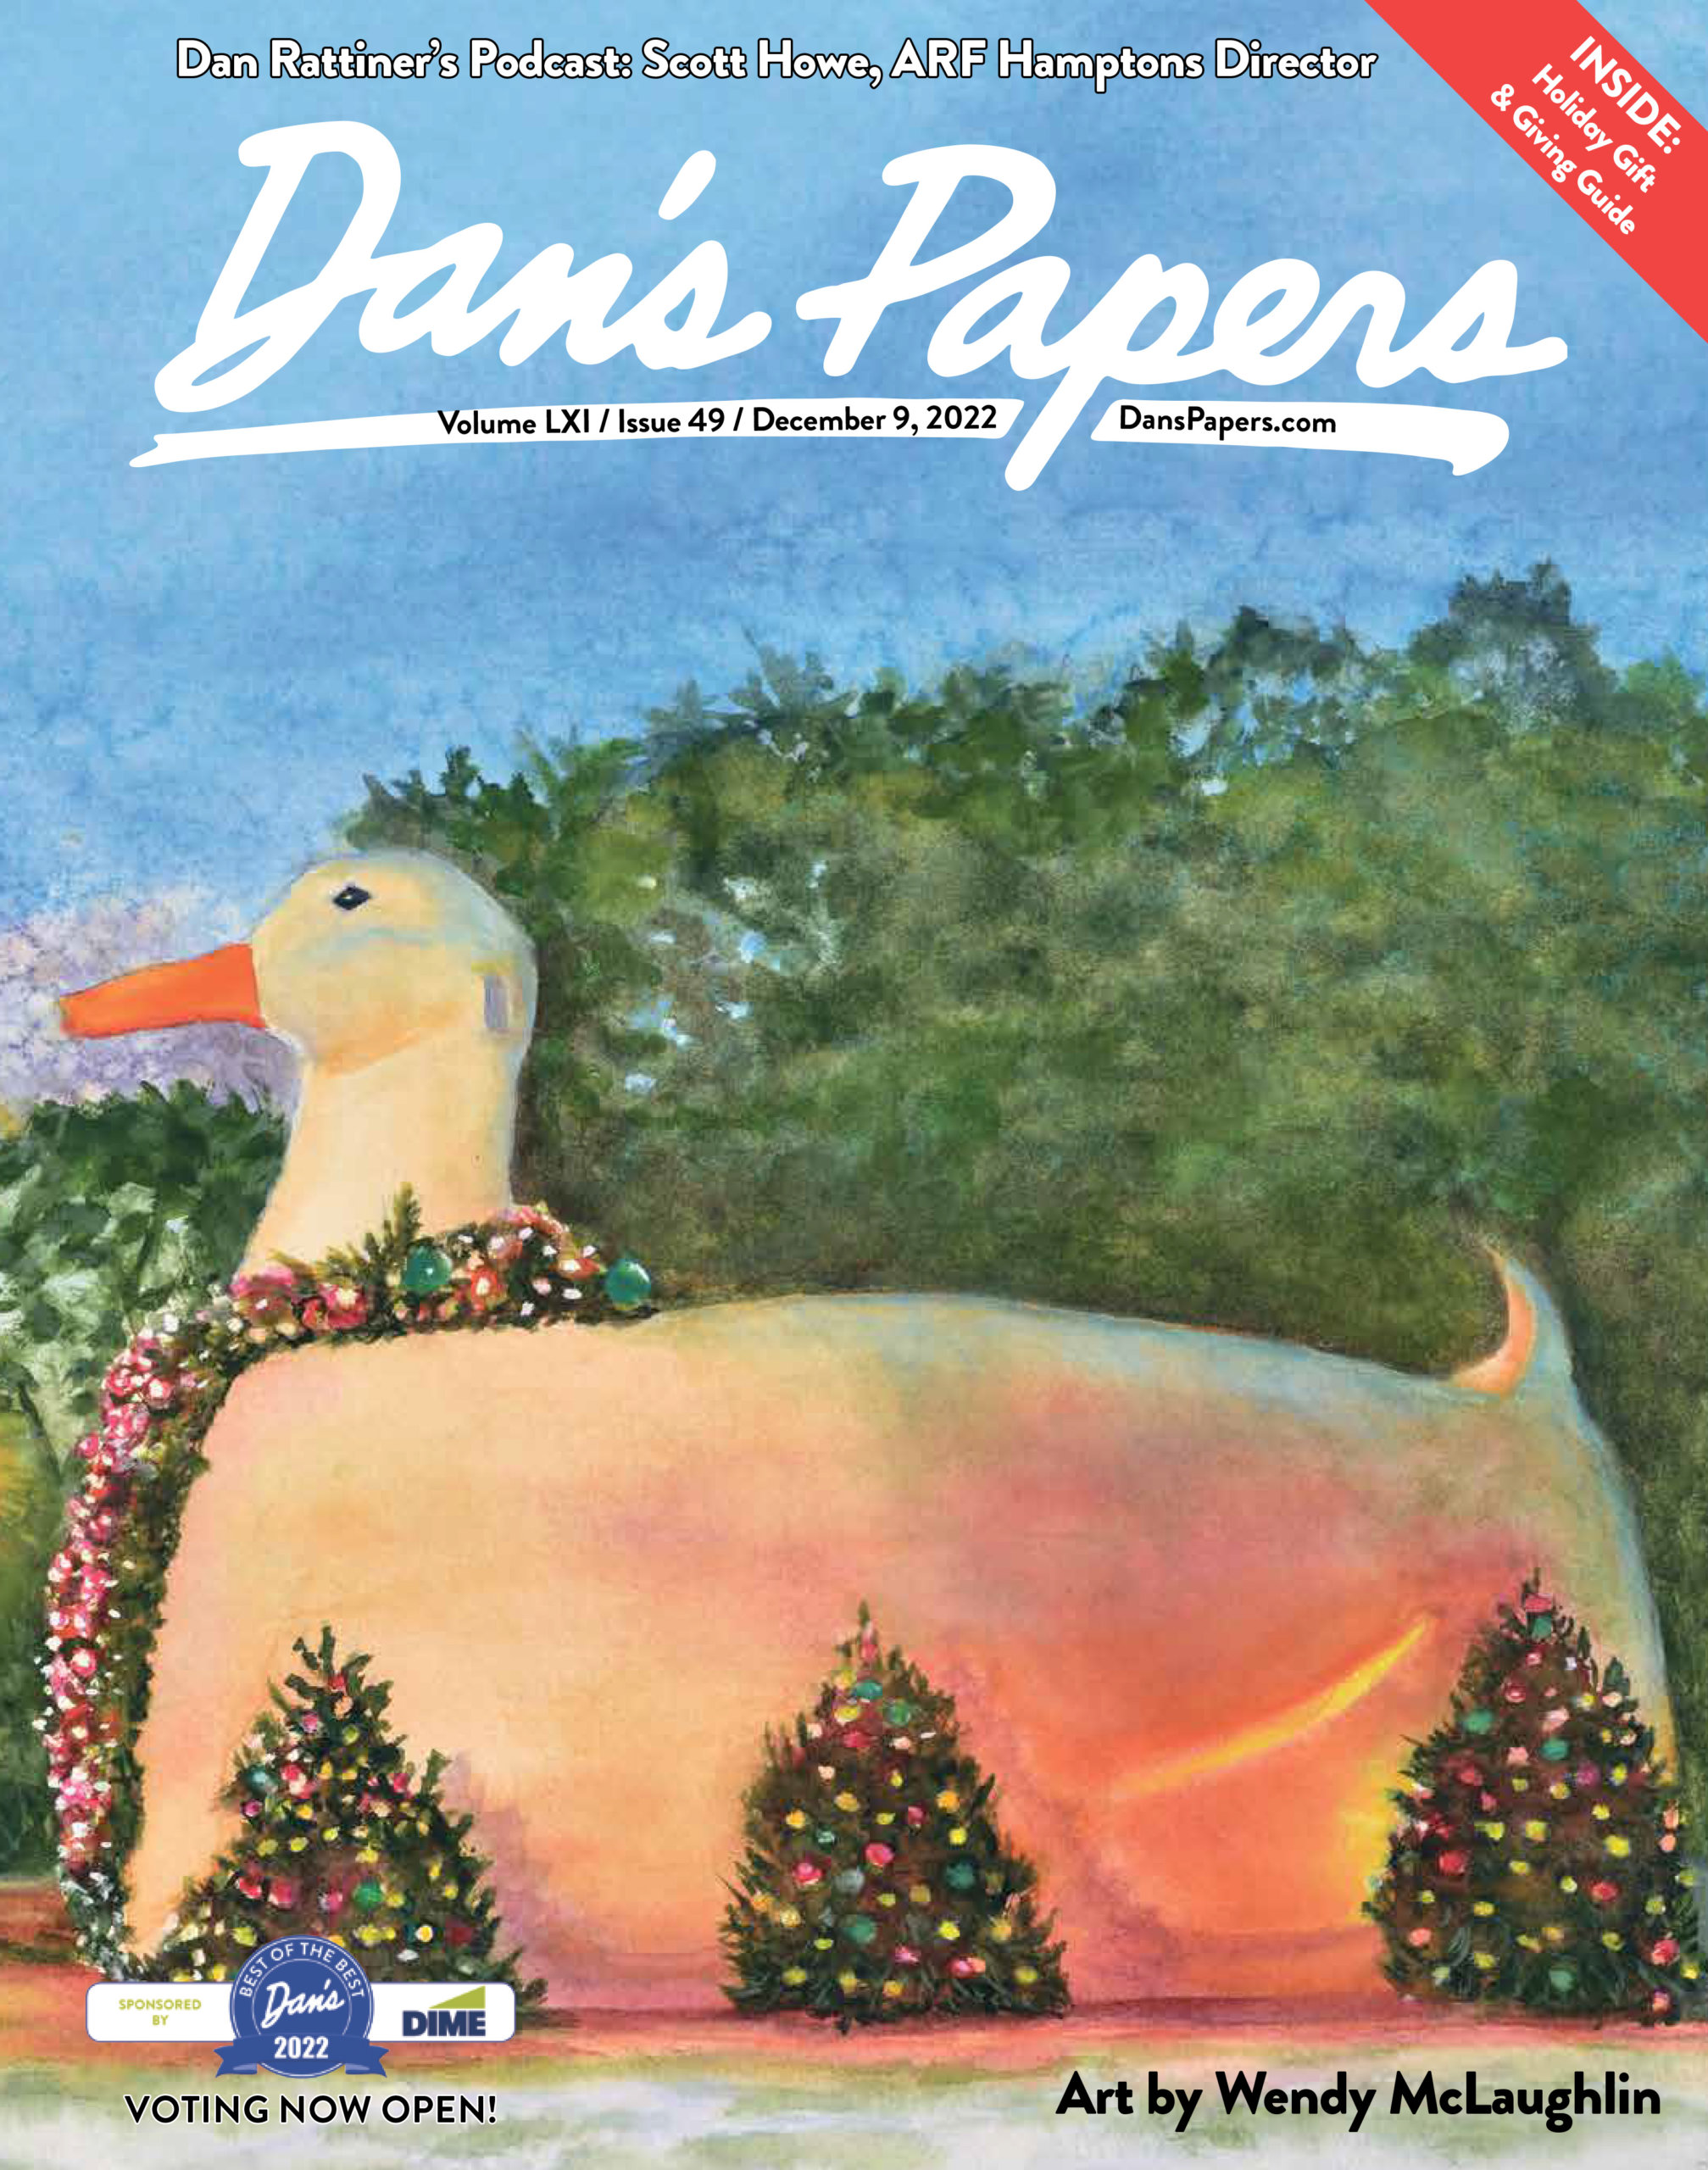 December 9, 2022 Dan's Papers cover art by Wendy McLaughlin featuring The Big Duck